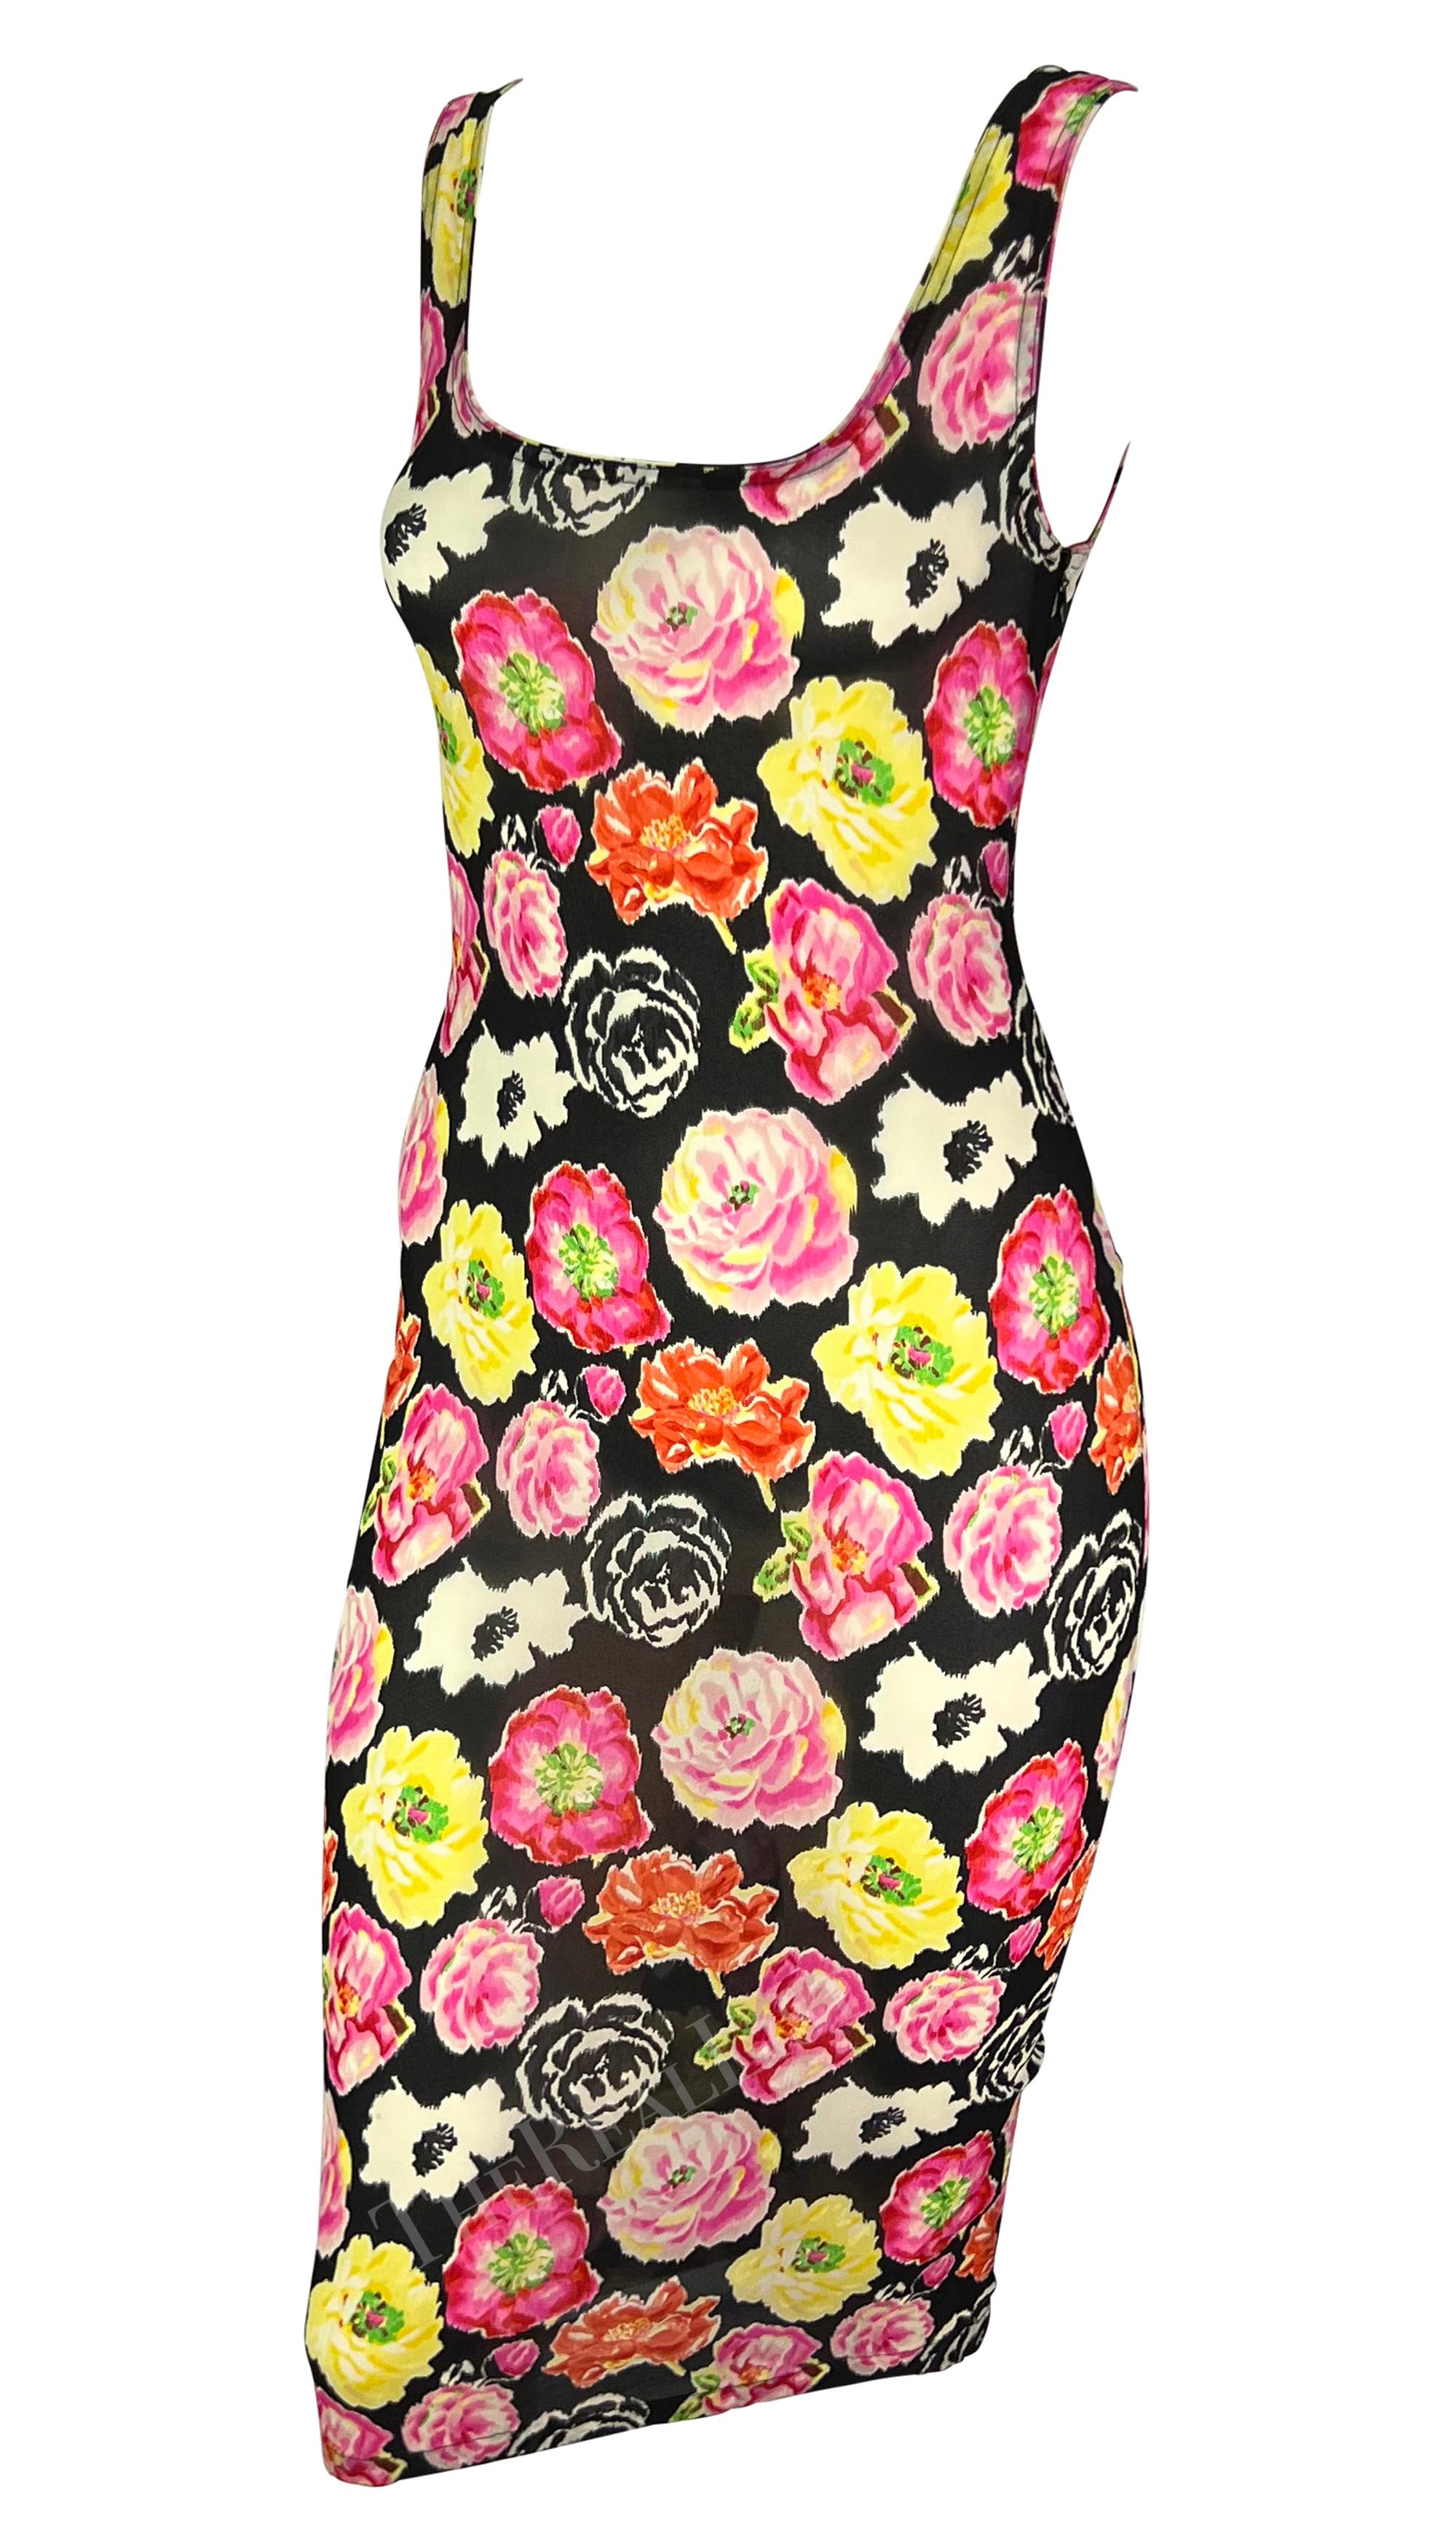 S/S 1995 Gianni Versace Runway Floral Print Semi-Sheer Slip Wiggle Dress In Excellent Condition For Sale In West Hollywood, CA